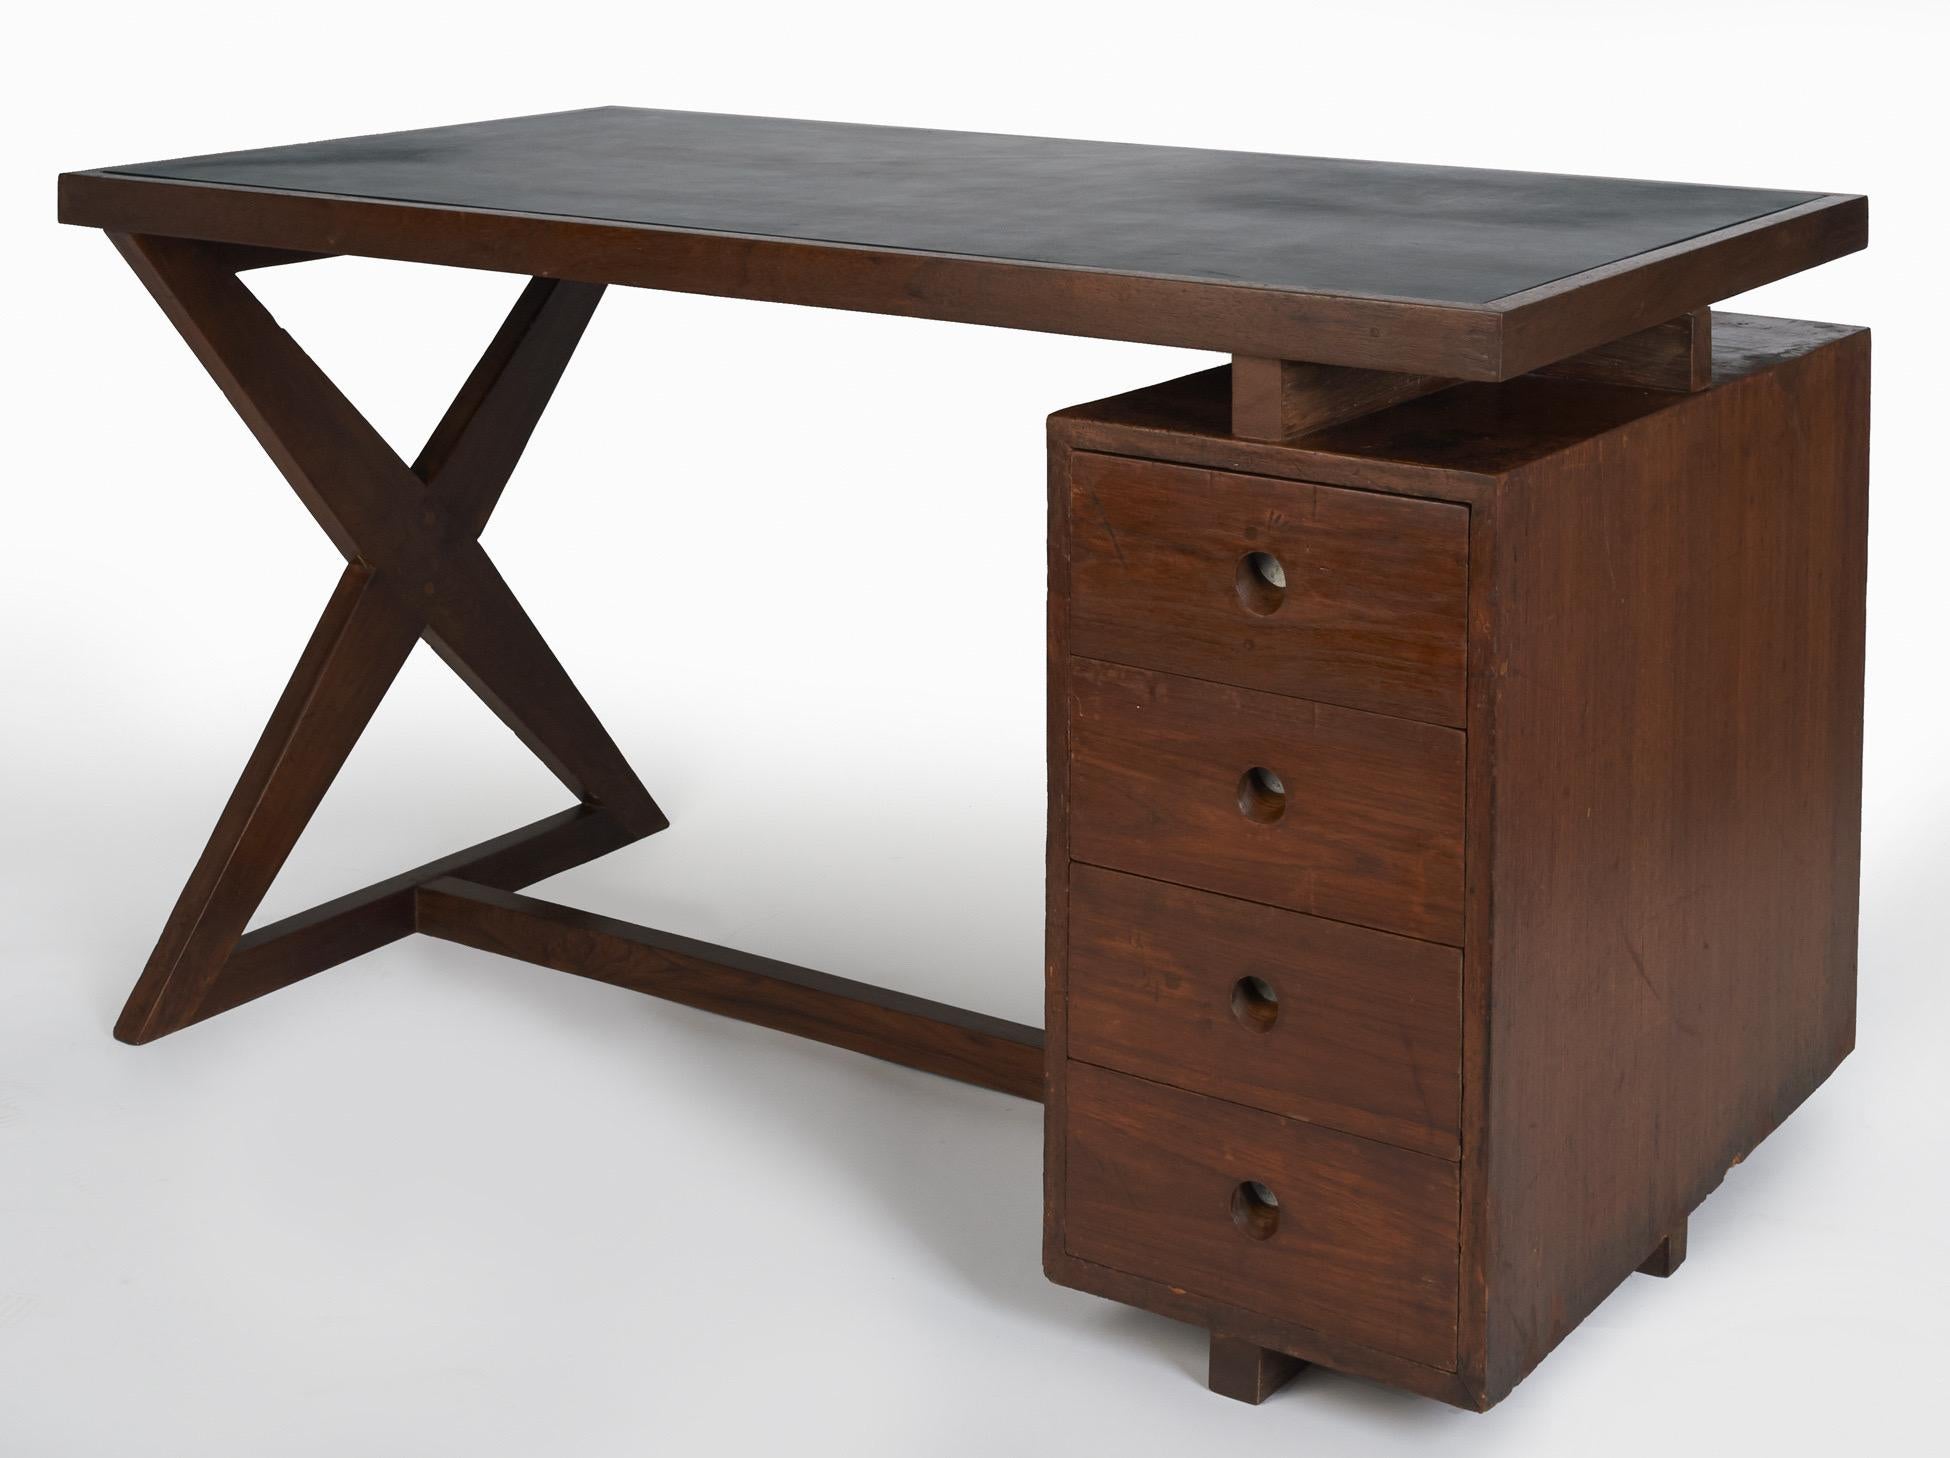 Pierre Jeanneret (1896-1967)

A rare and spectacular original four-drawer desk, in solid teak, by Pierre Jeanneret for the civic buildings in Chandigarh, India, designed by Le Corbusier. The generously proportioned bureau features a highly